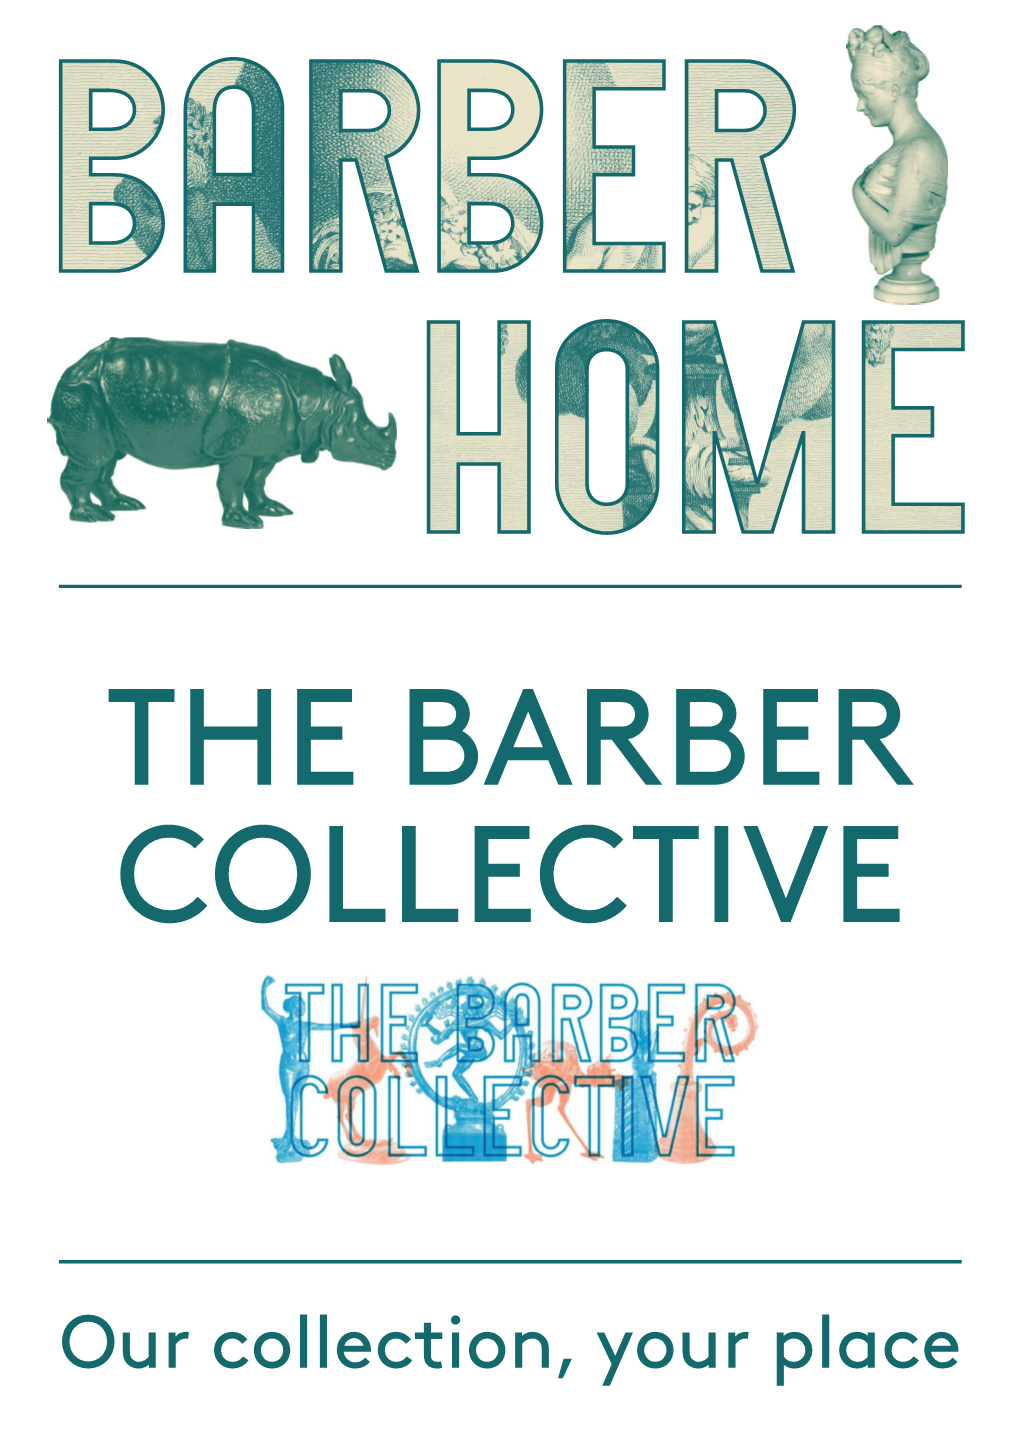 Our Collection, Your Place the Barber Collective